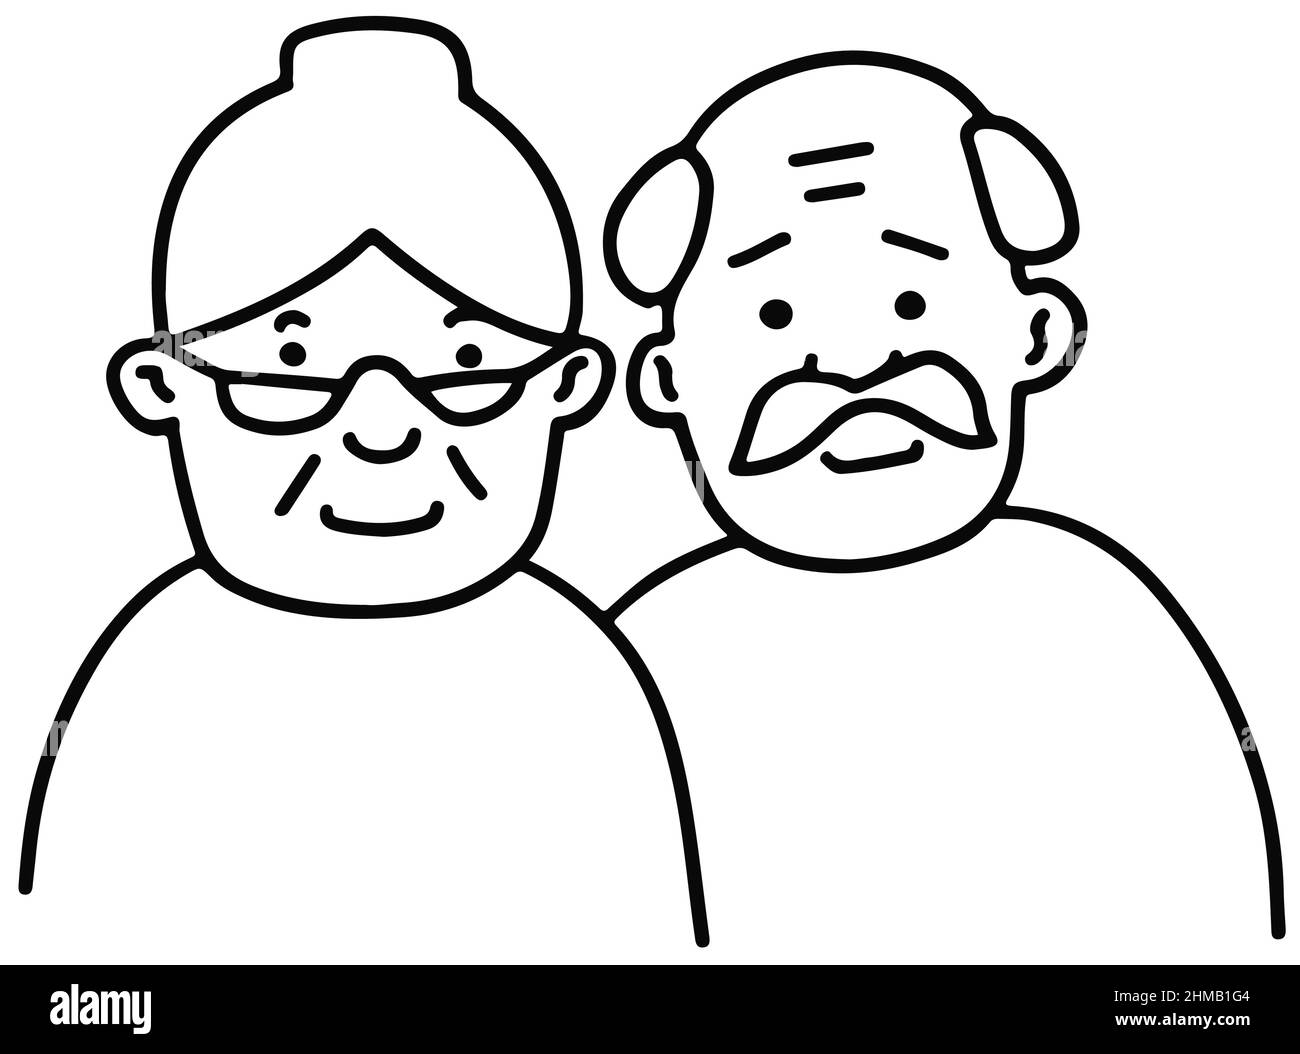 Retired elderly senior Happy Old Pensioner Man and Woman Couple doodle Vector Illustration Stock Vector